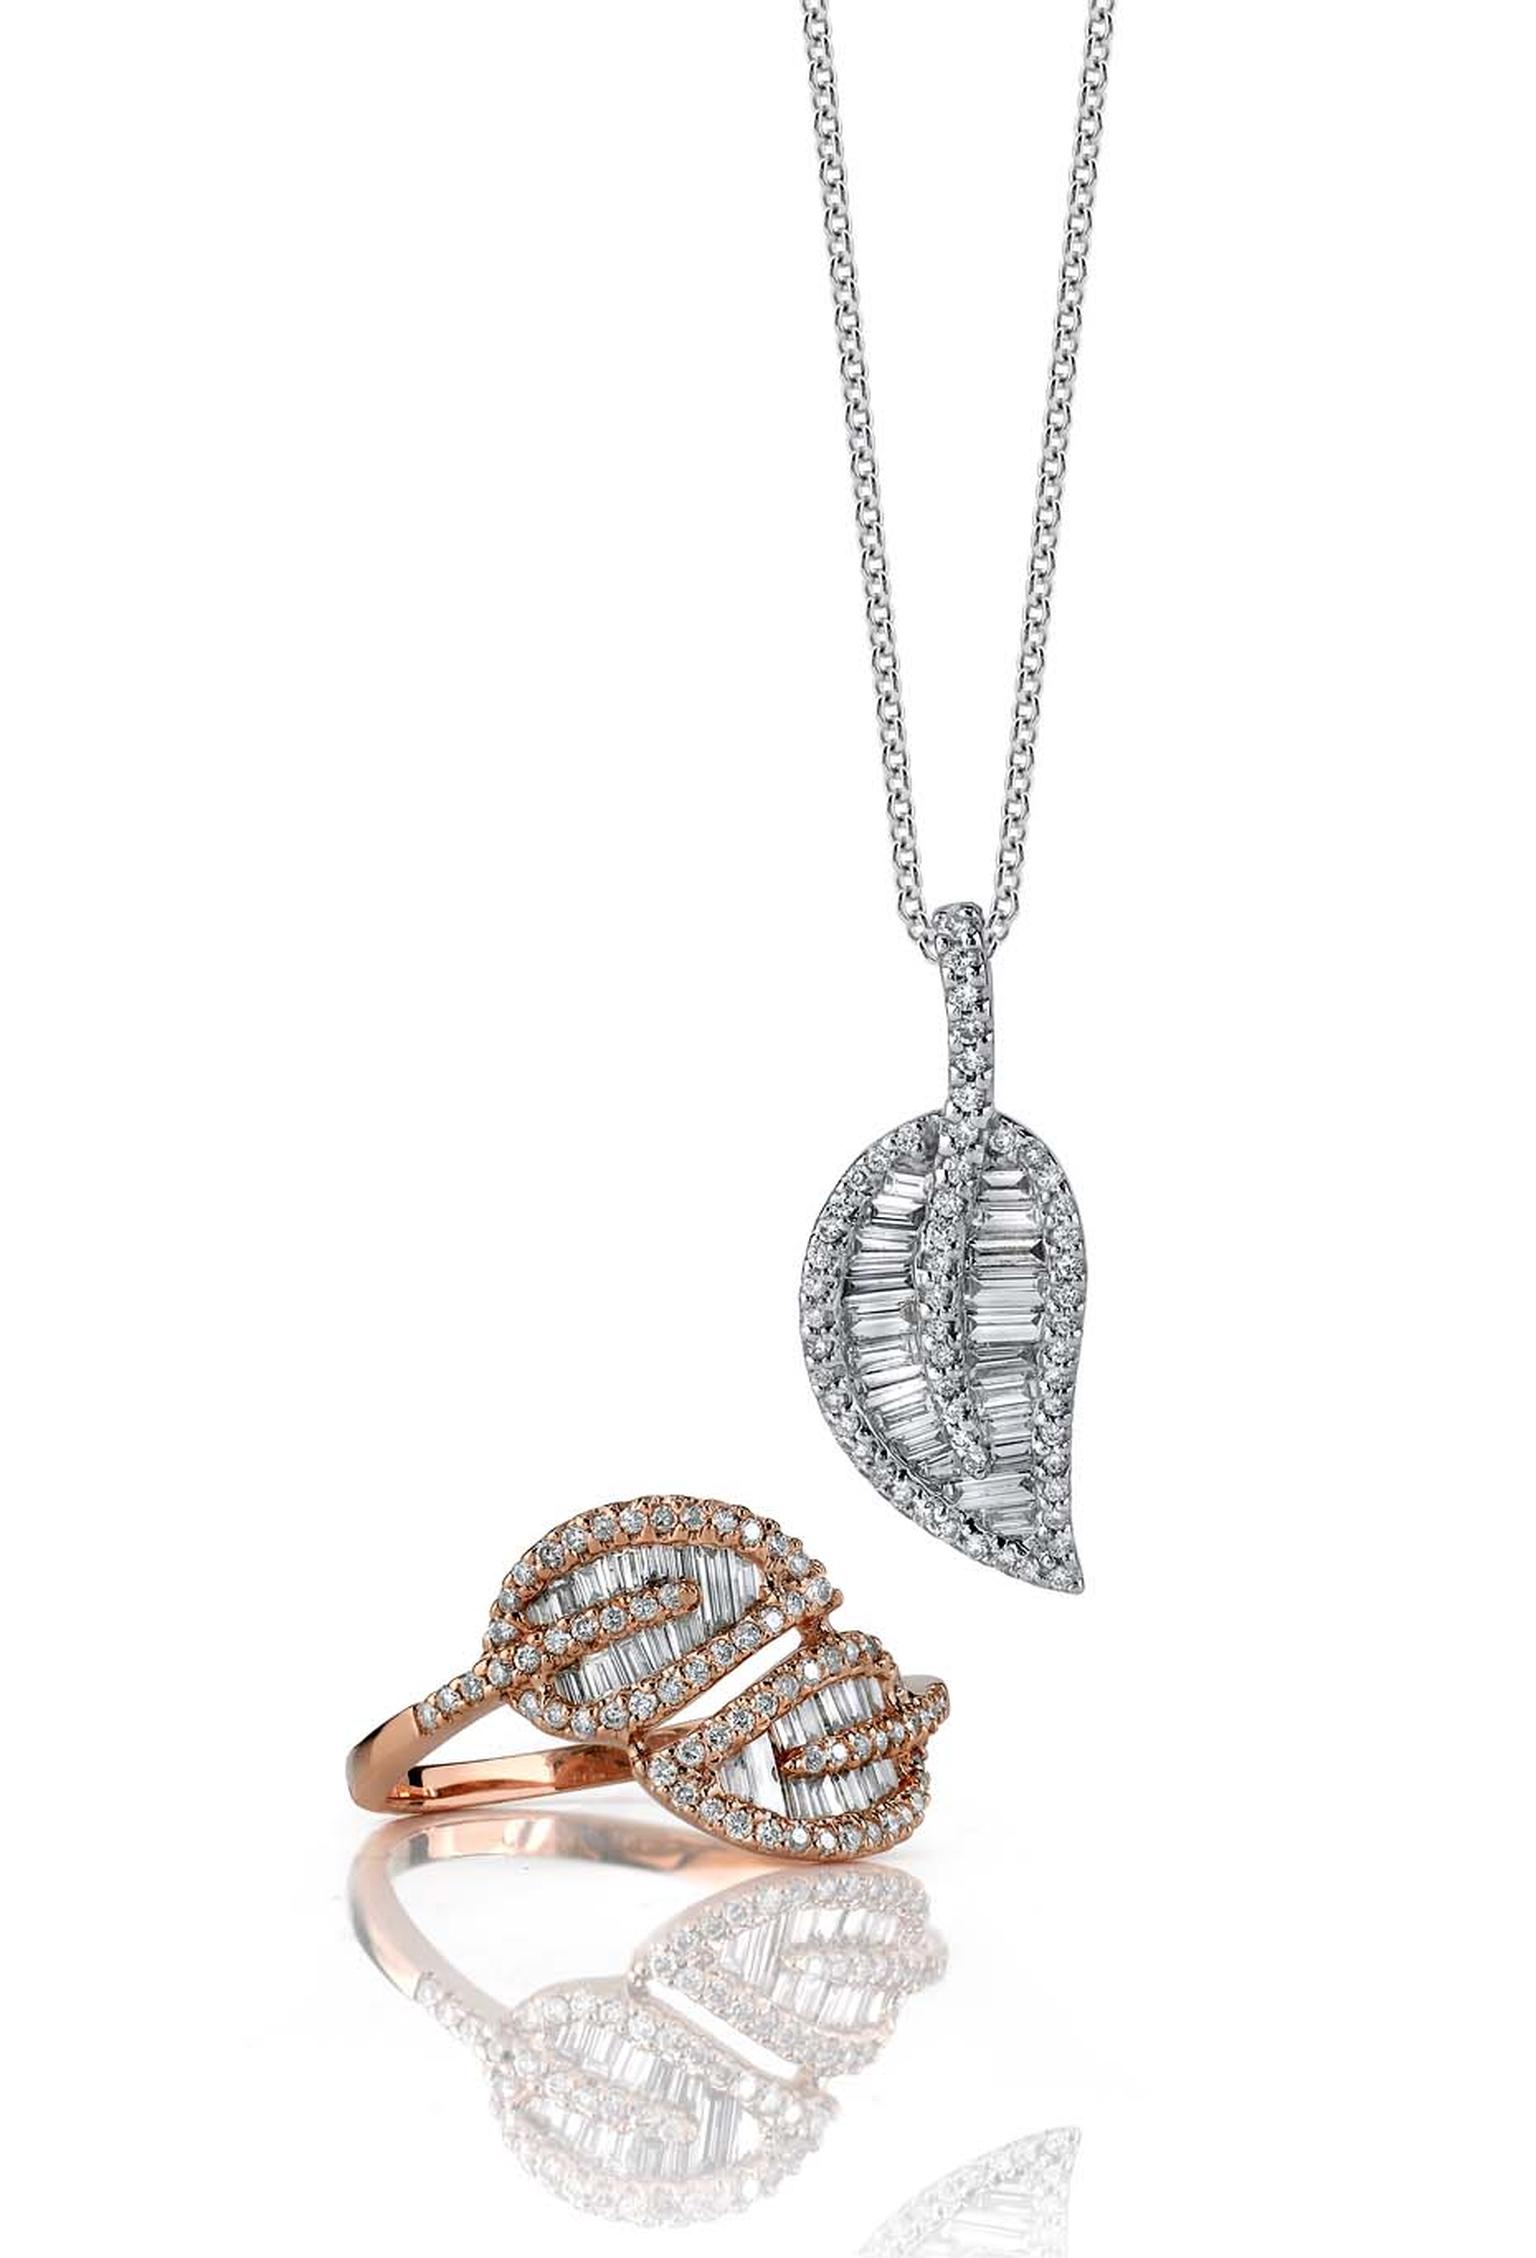 Anita Ko Double Leaf gold and diamond ring and necklace ($4,700 and $3,990).